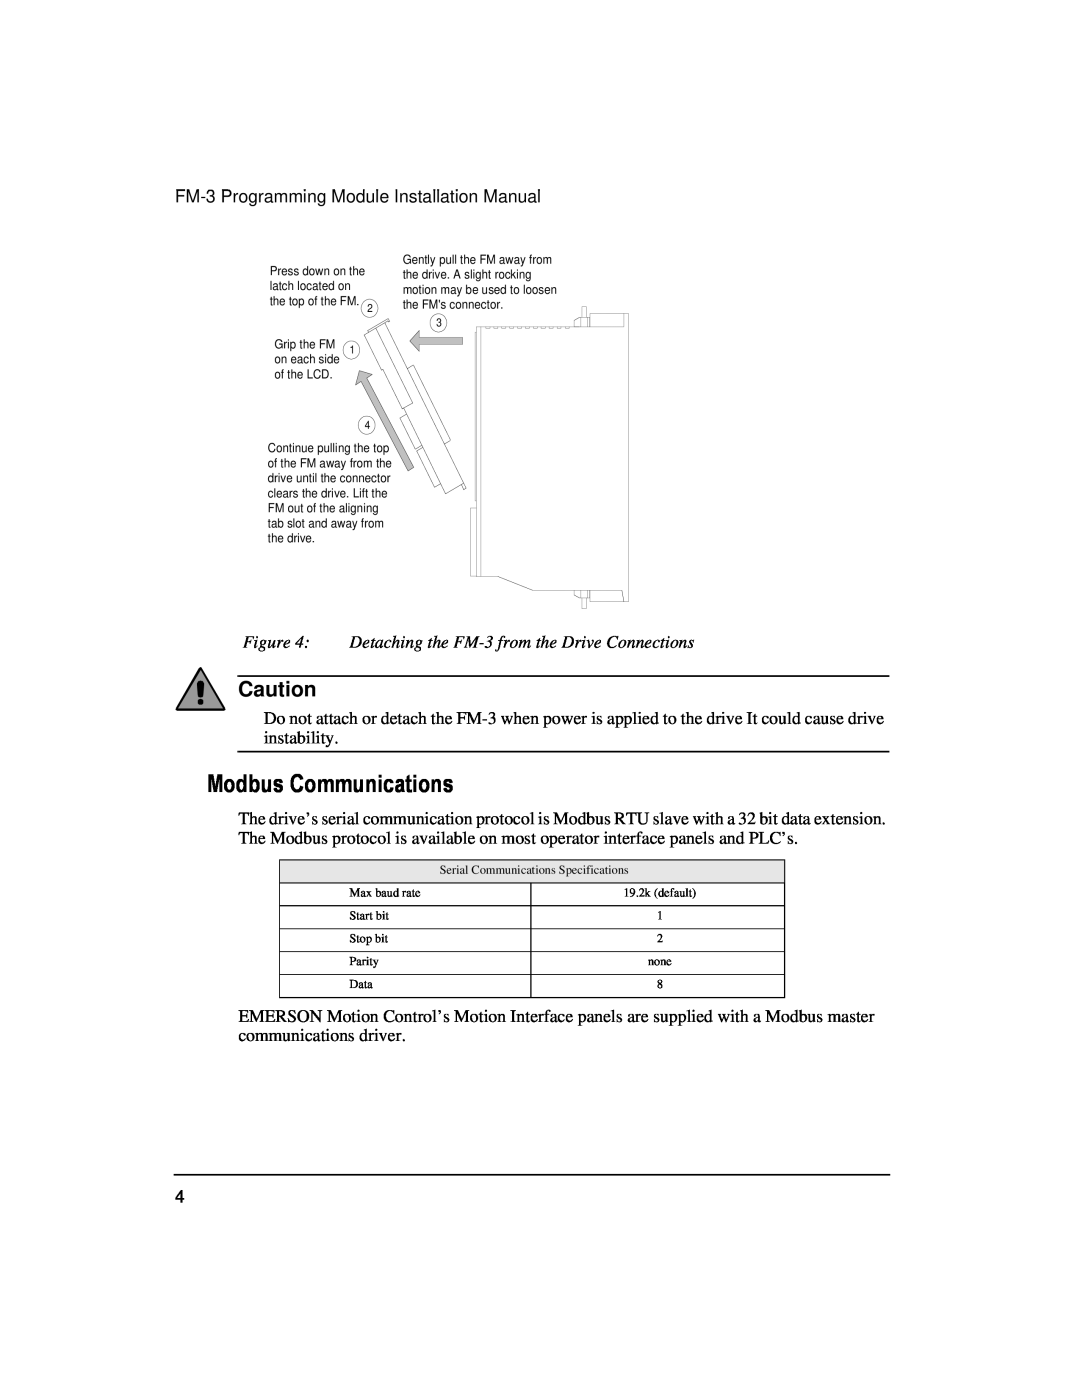 Emerson 400508-02 installation manual Modbus Communications, Detaching the FM-3 from the Drive Connections 